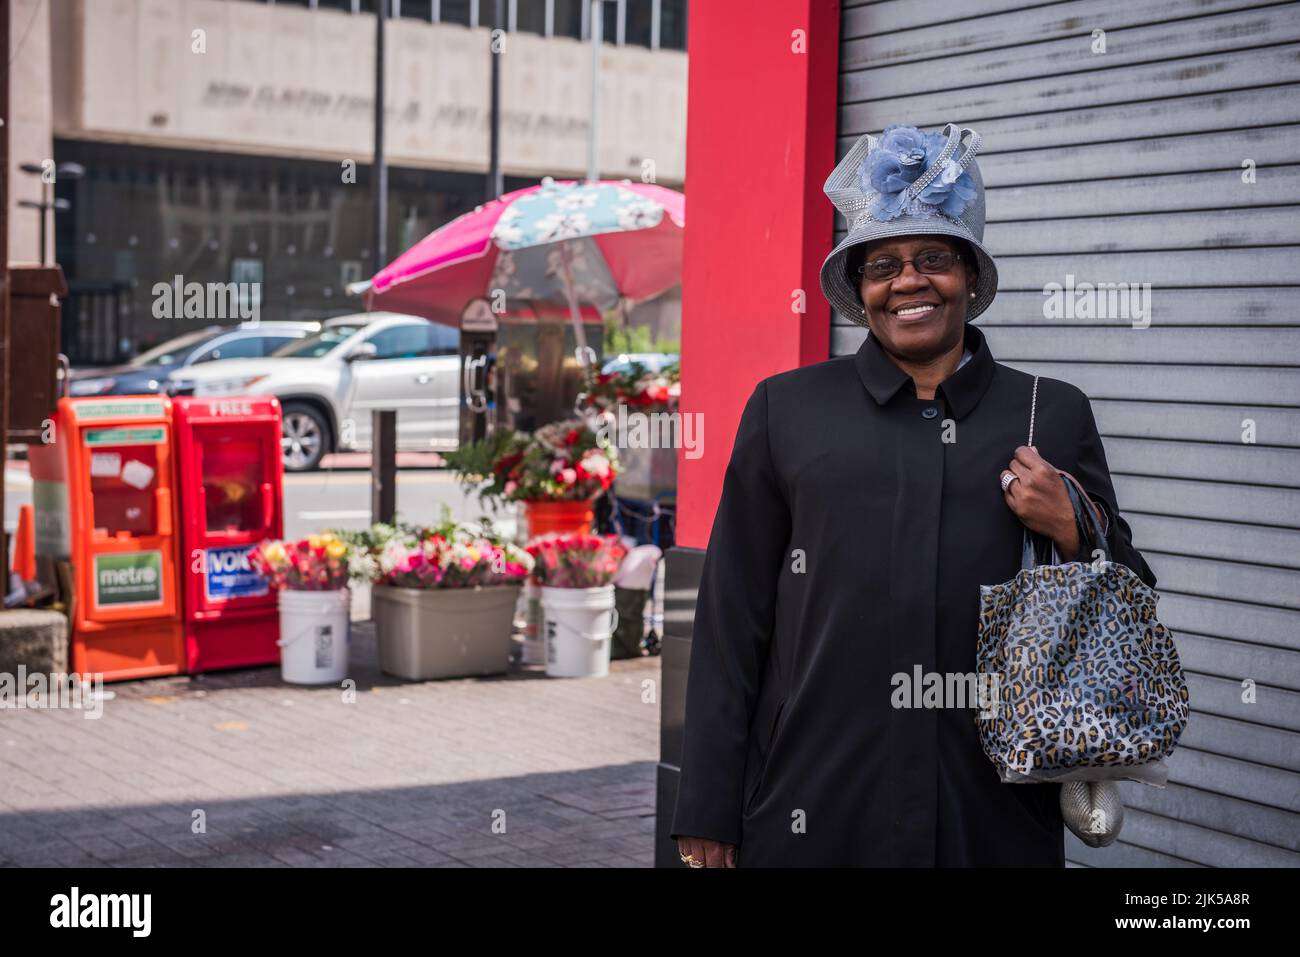 New York, NY/USA - 05-07-2016: African American woman wearing fancy hat and church clothes. Stock Photo